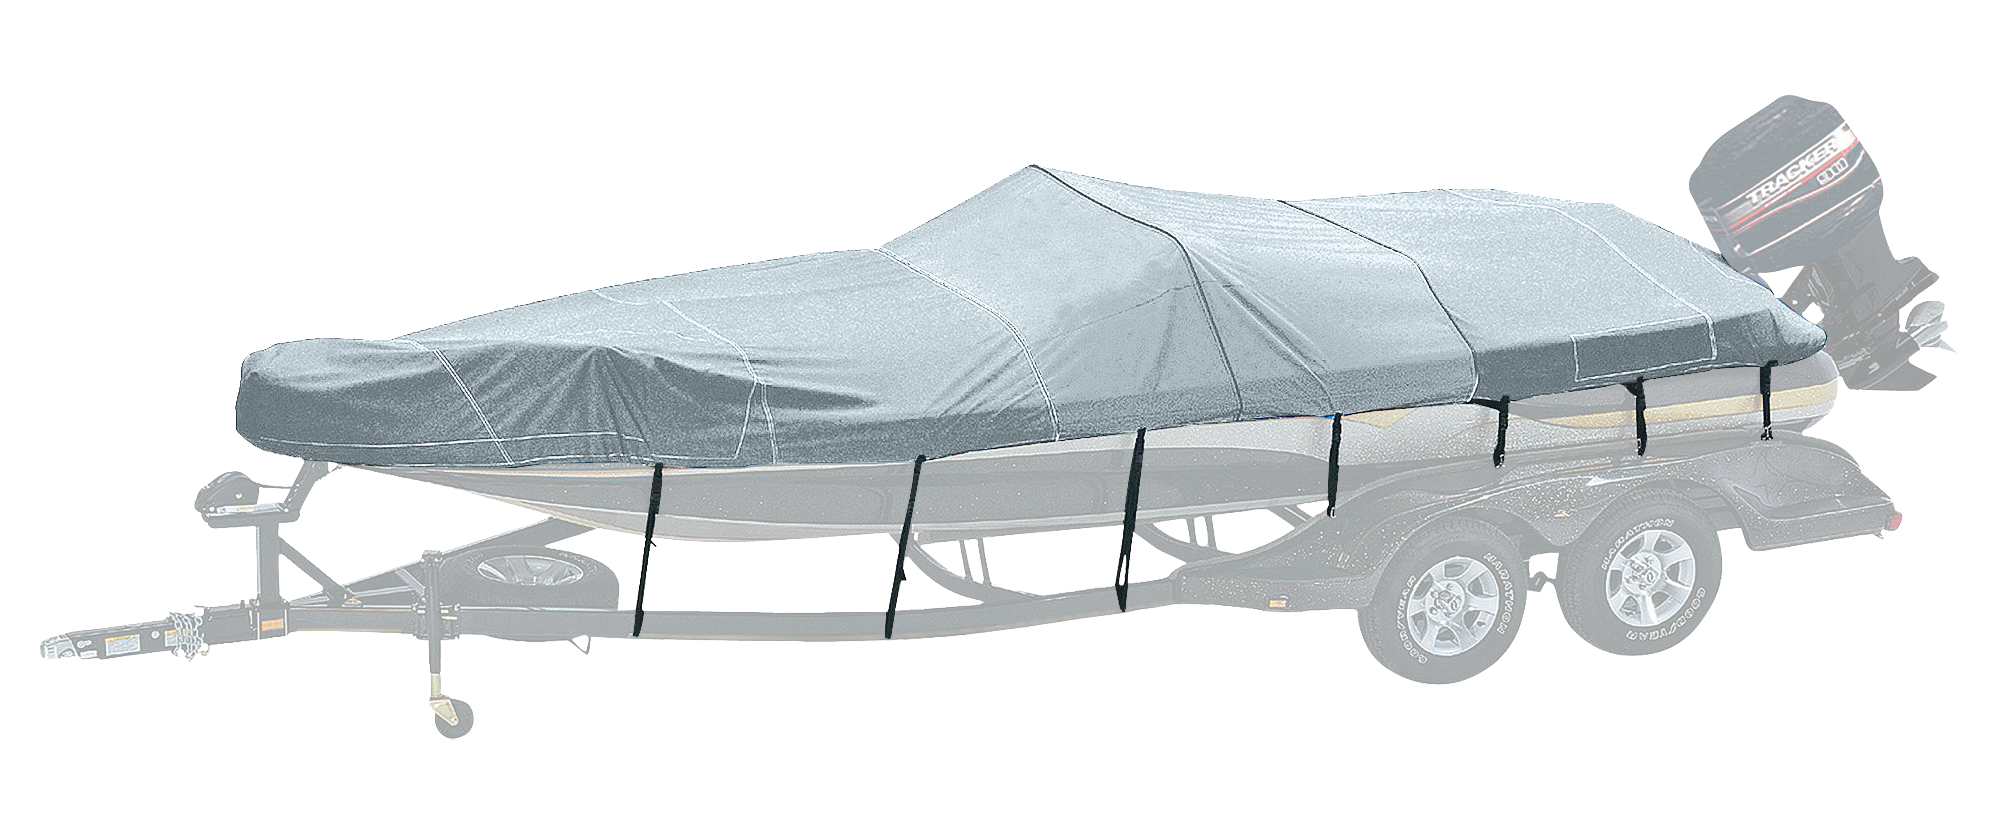 Bass Pro Shops Exact Fit Boat Cover by Westland - Tahoe - 2005 228 Deckboat I/O with Tower - Arctic Silver